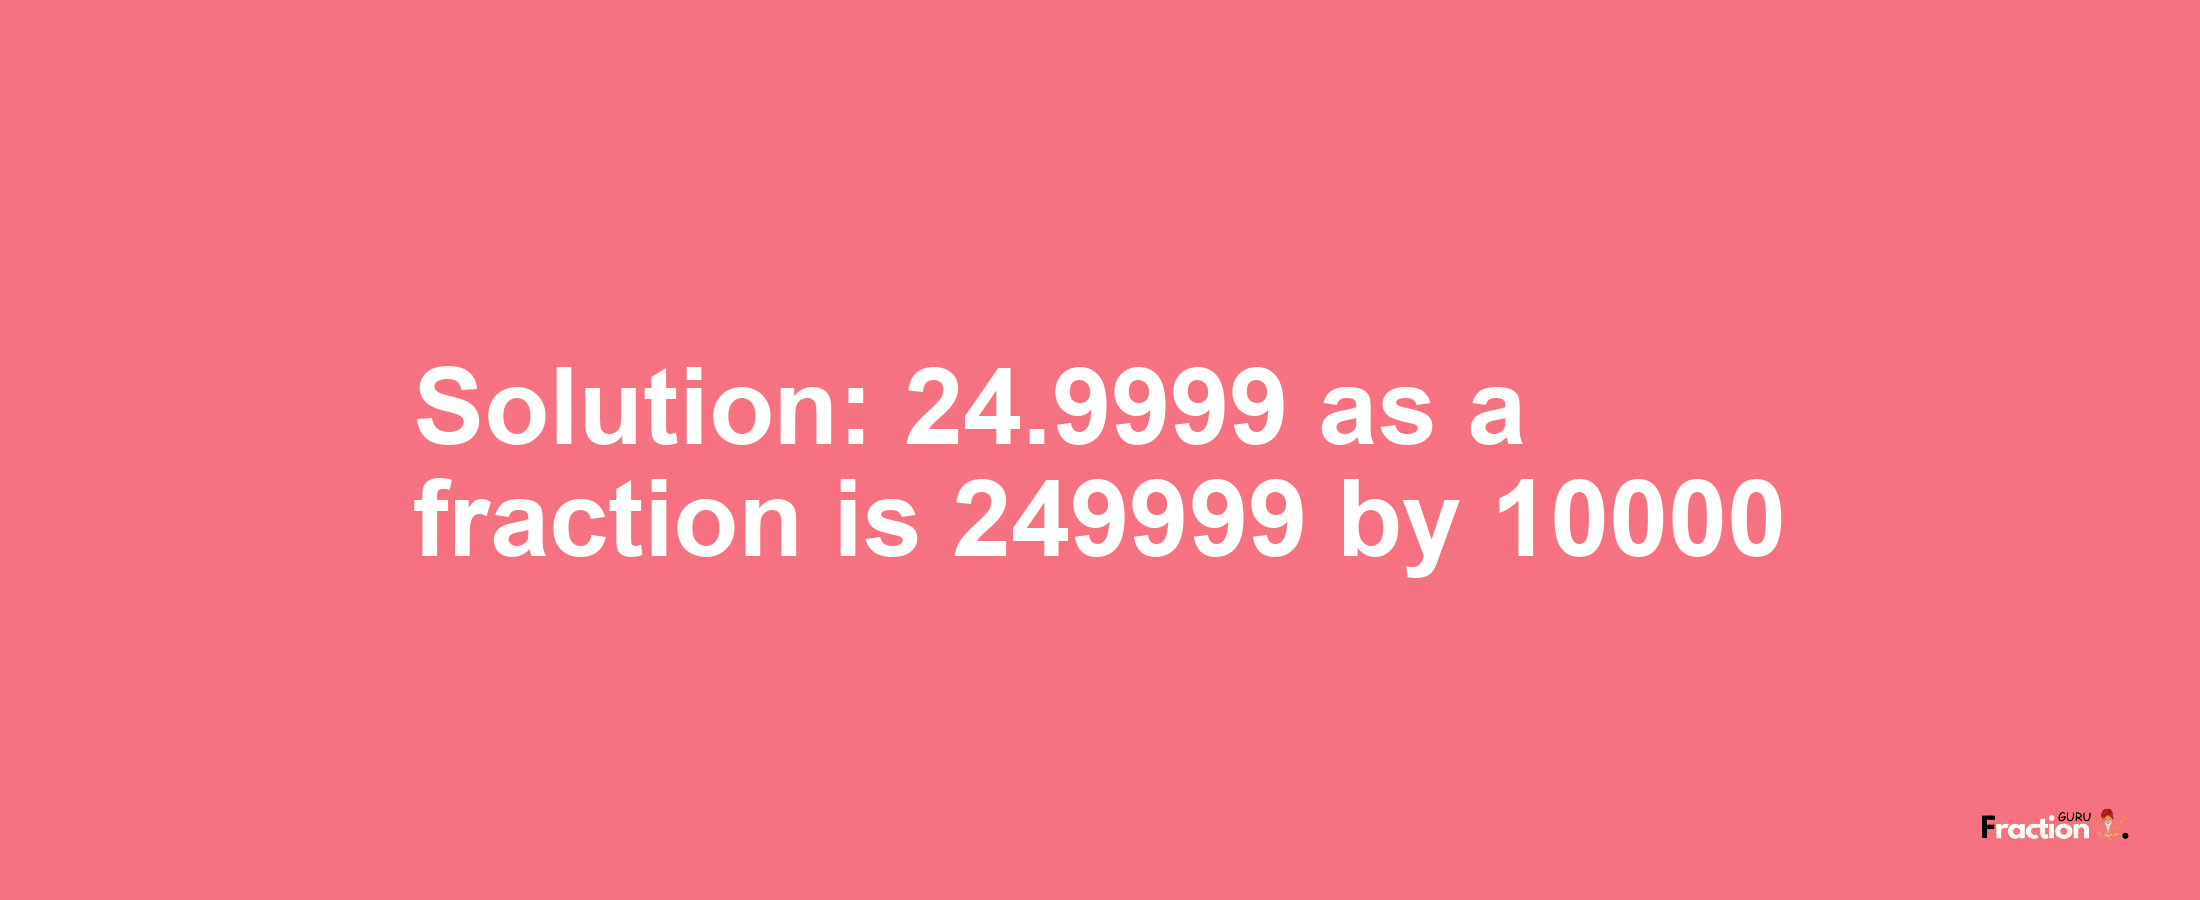 Solution:24.9999 as a fraction is 249999/10000